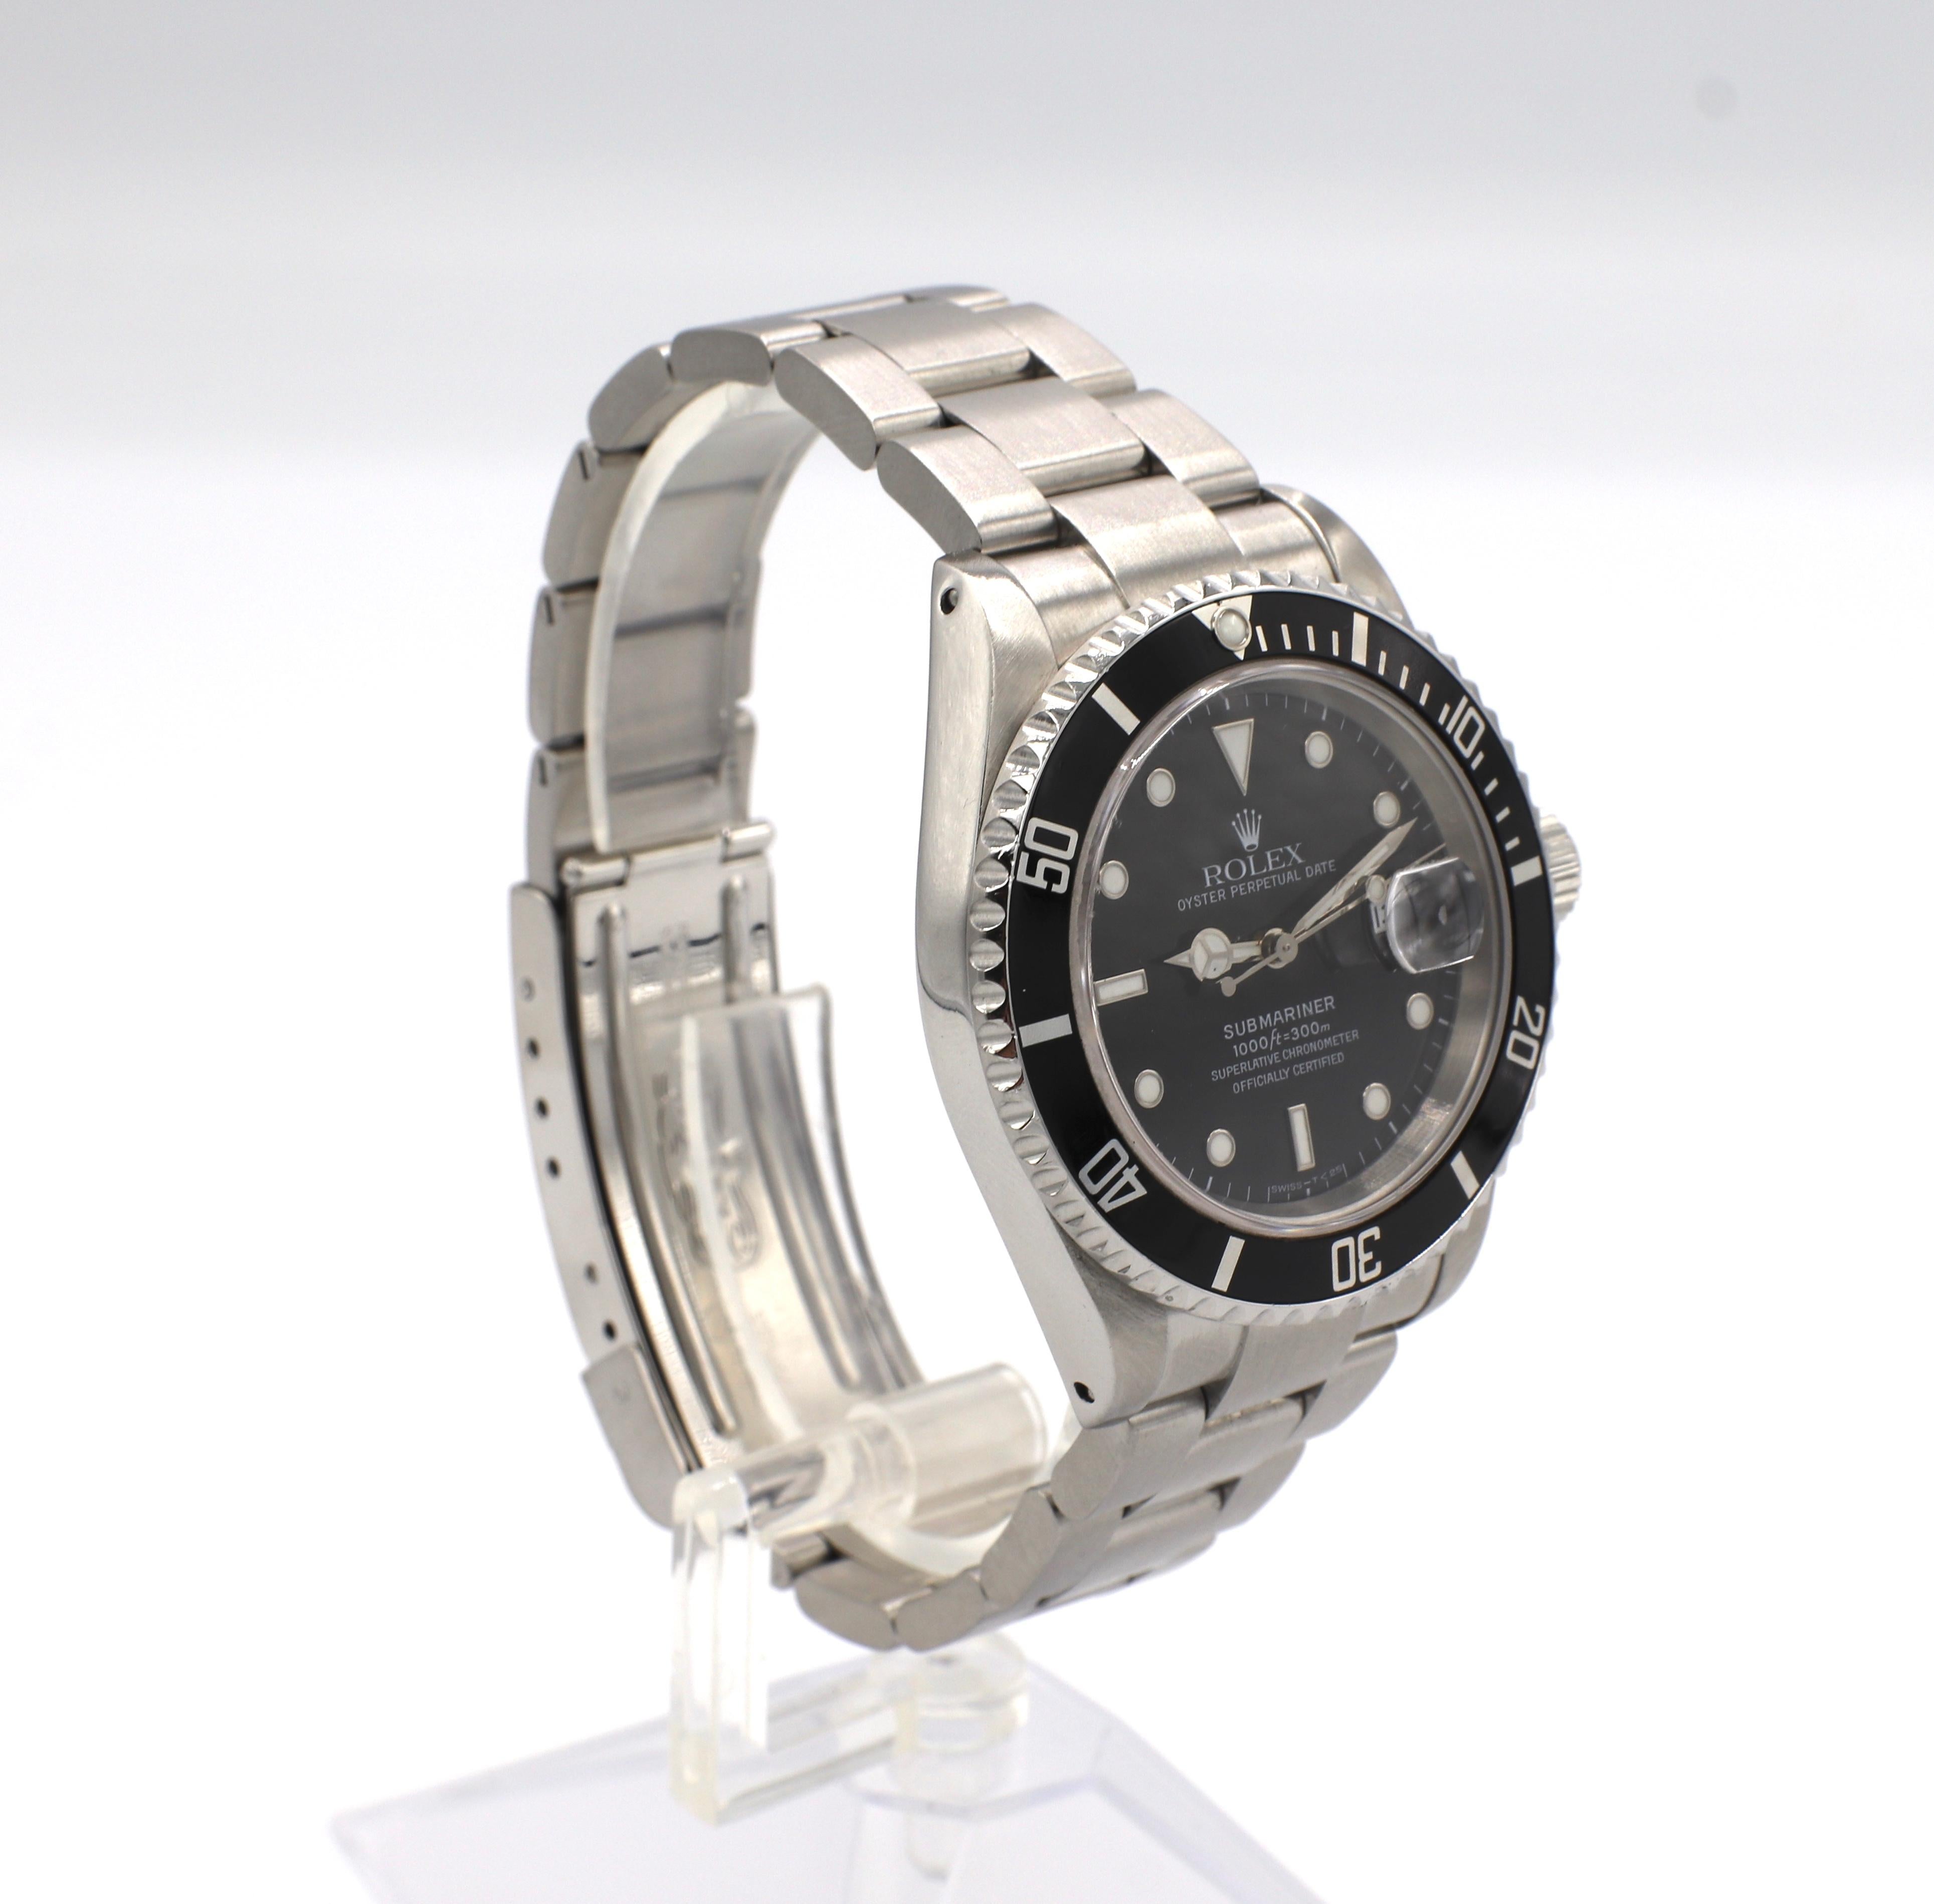 Rolex Submariner Stainless Steel Reference 16610

Model/Reference: 16610
Serial: T990*** (circa 1996)
Metal: Stainless steel
Dial: Black
Case: 40mm
Movement: Automatic 
Condition: Very good, slight scratches to crystal and date magnifier.